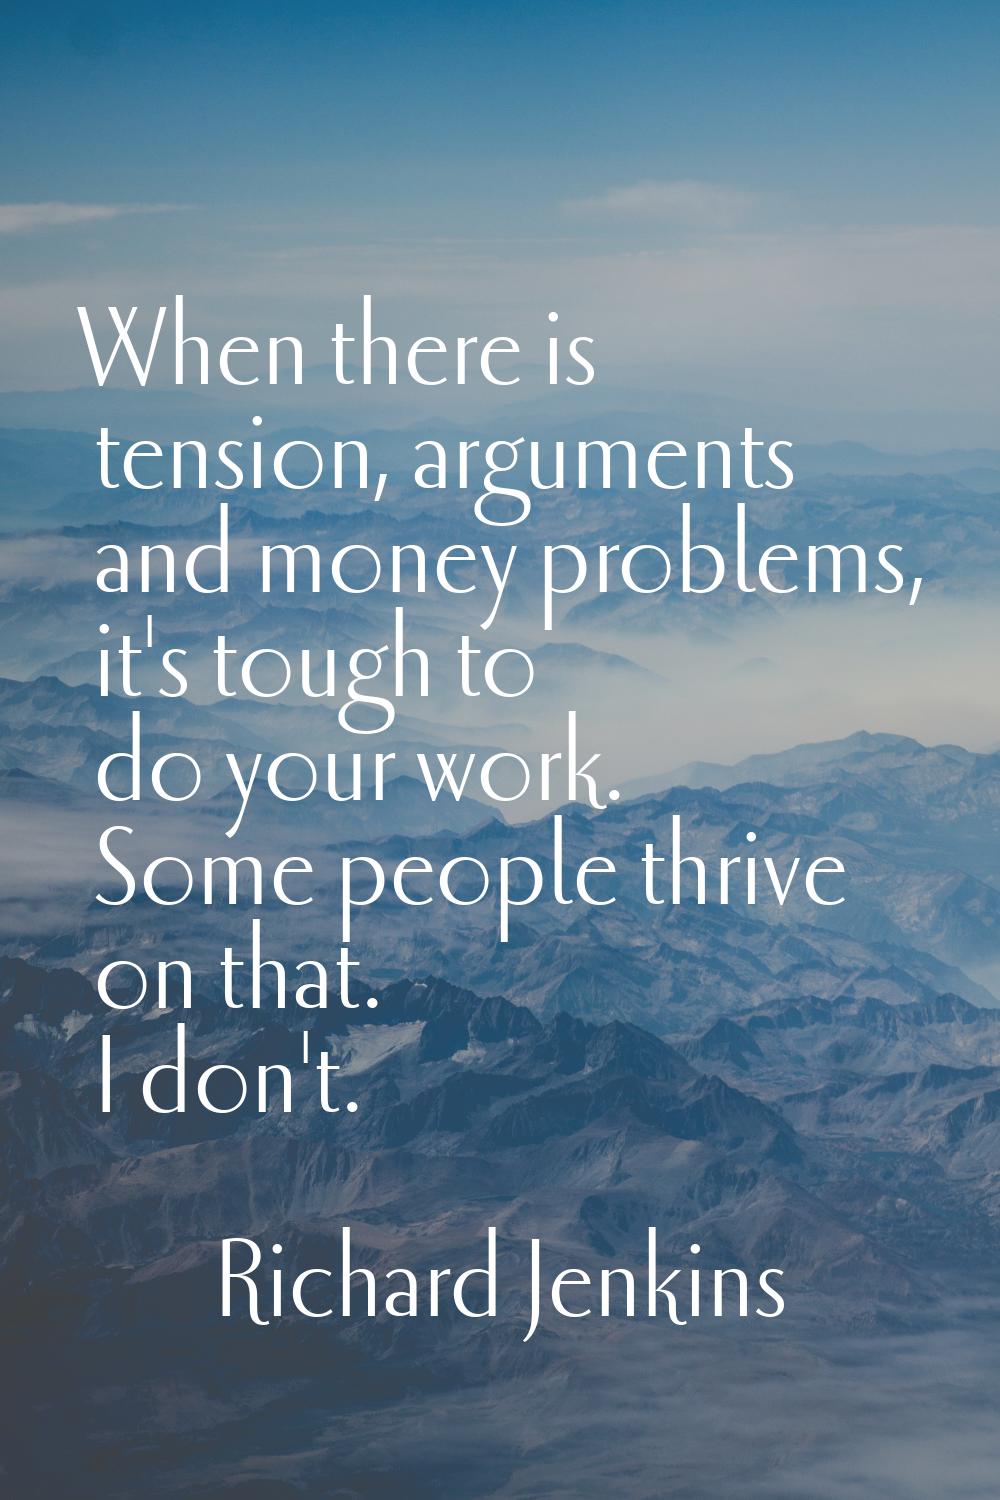 When there is tension, arguments and money problems, it's tough to do your work. Some people thrive